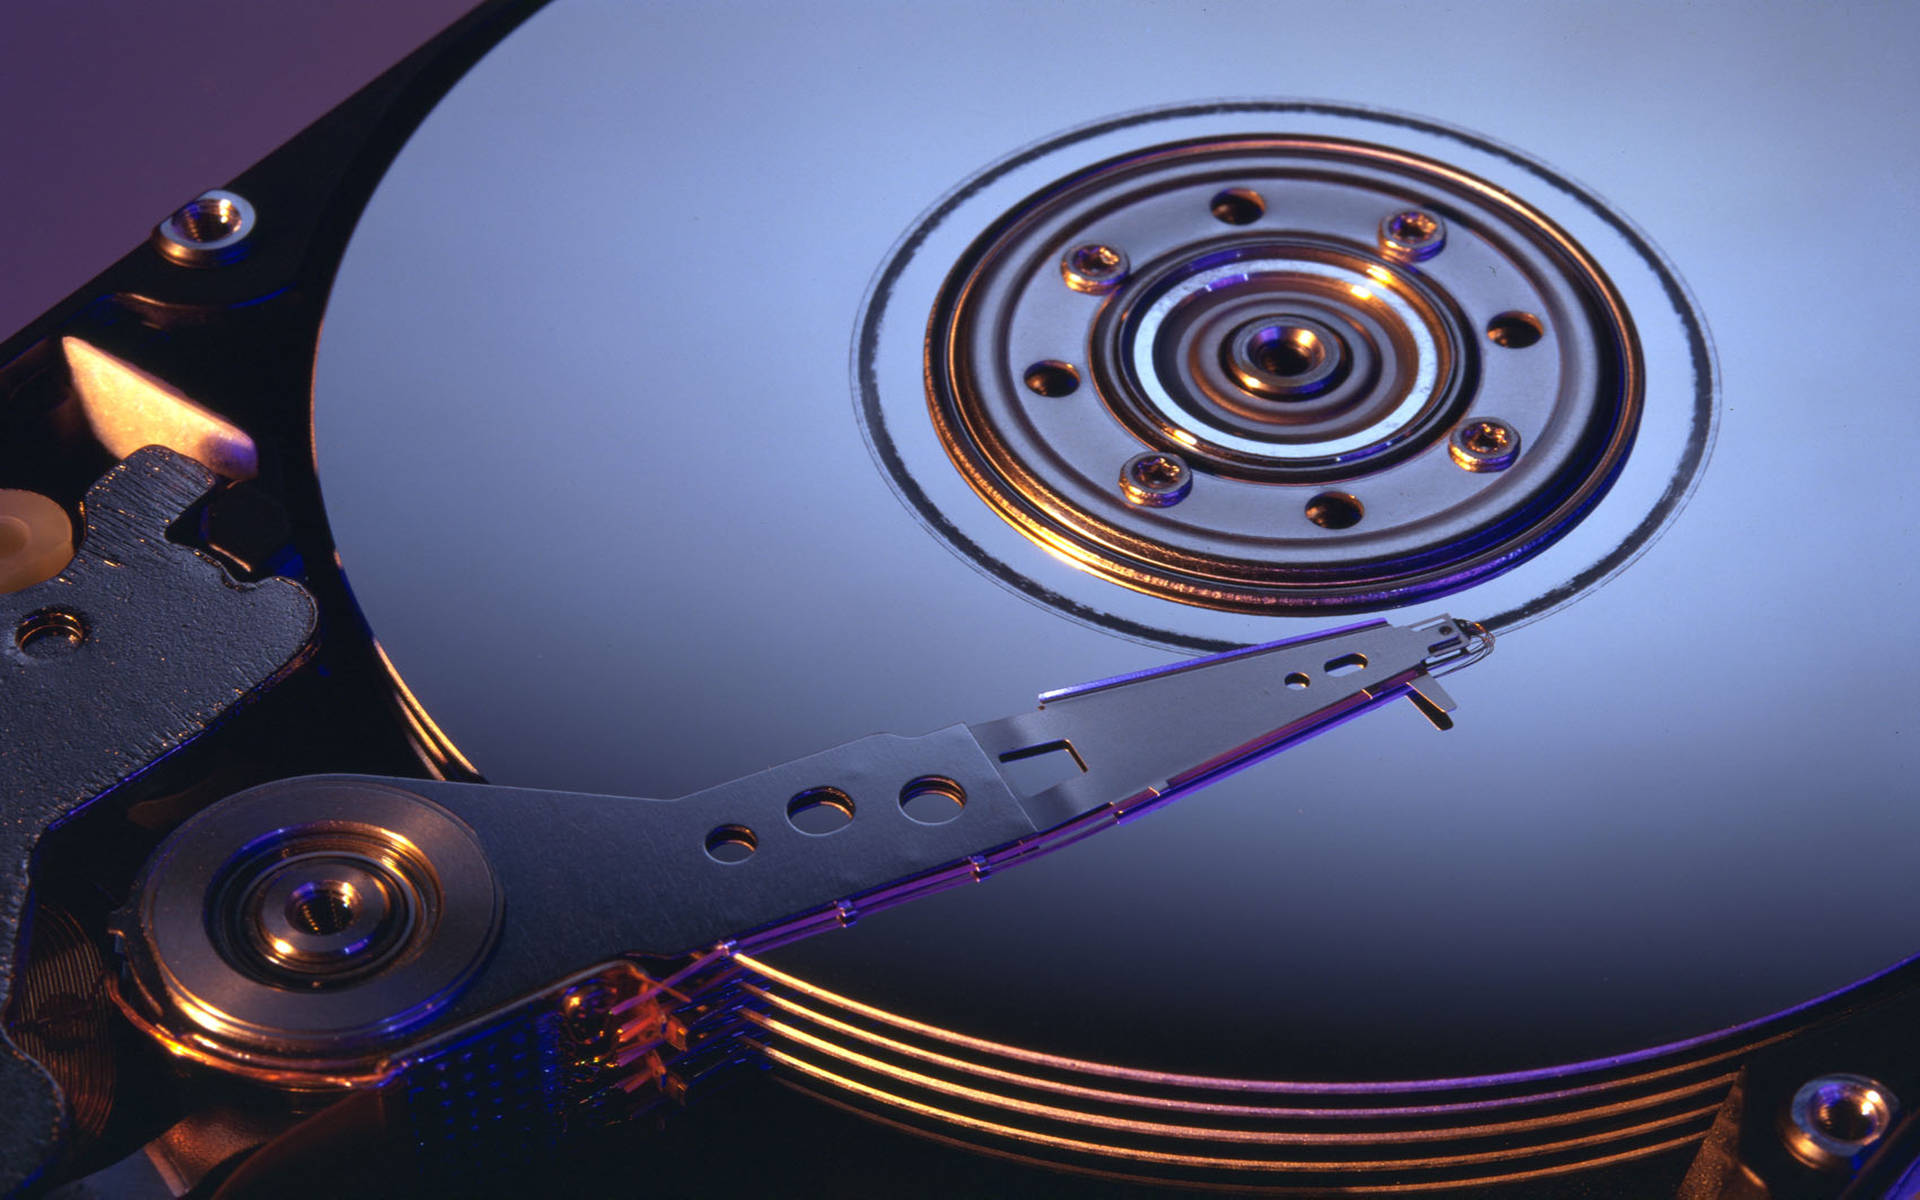 Caption: Inside View of a Polished Internal Computer Hard Drive Wallpaper